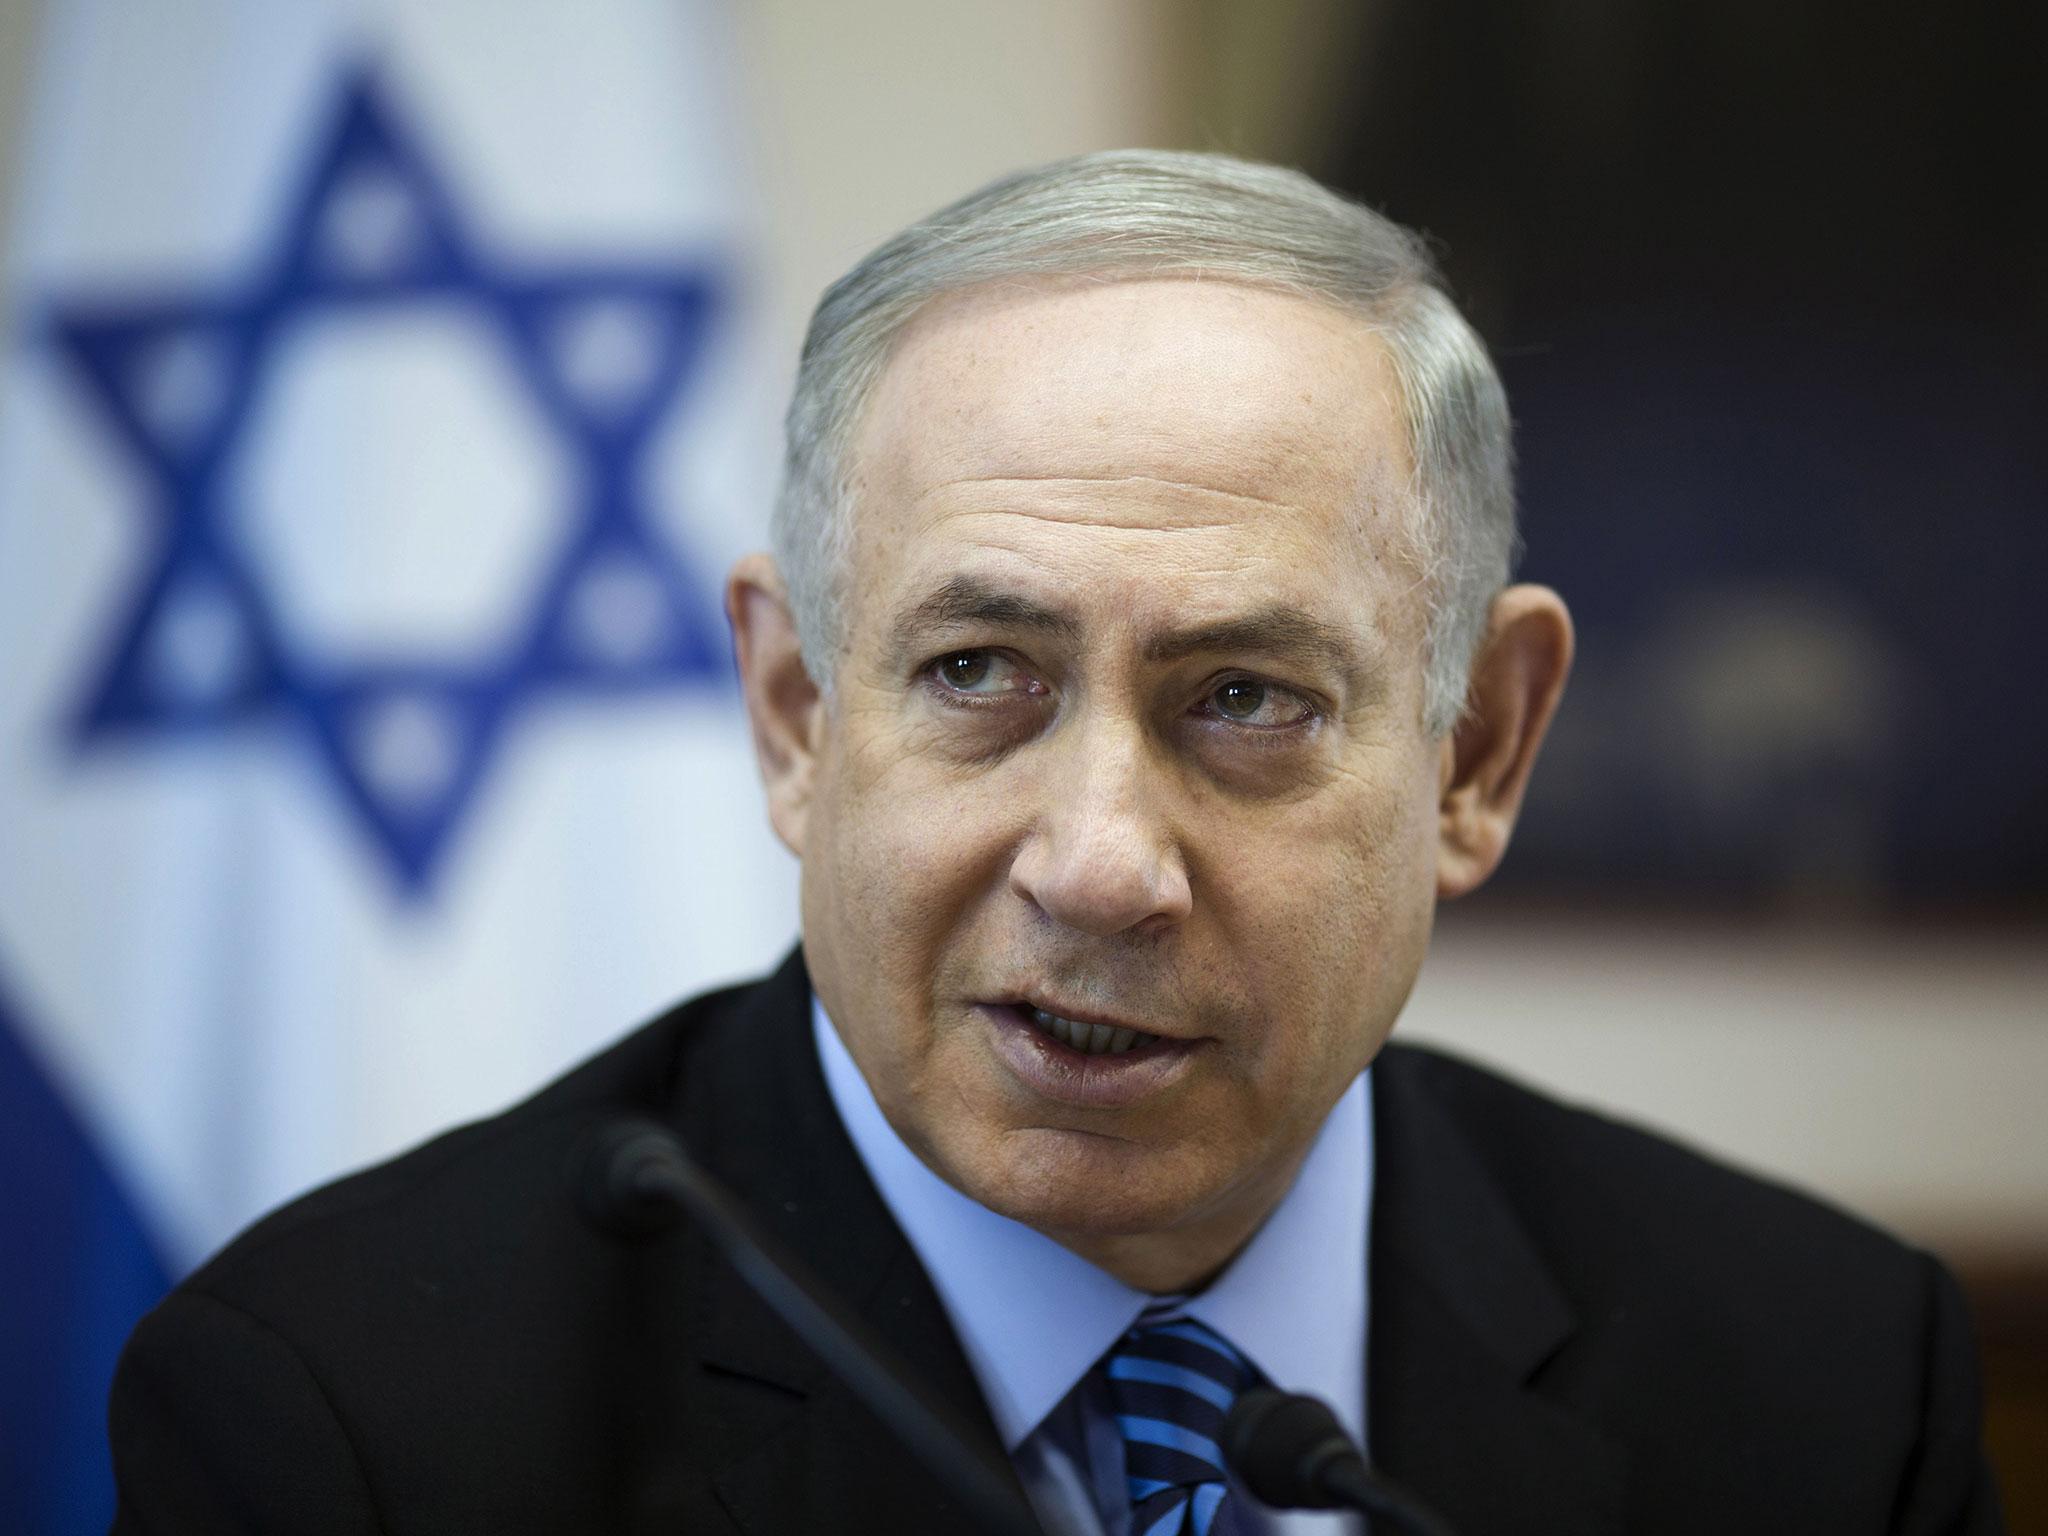 Israeli Prime Minister Benjamin Netanyahu had previously warned ministers to refrain from speaking publicly about their views on Mr Trump's election